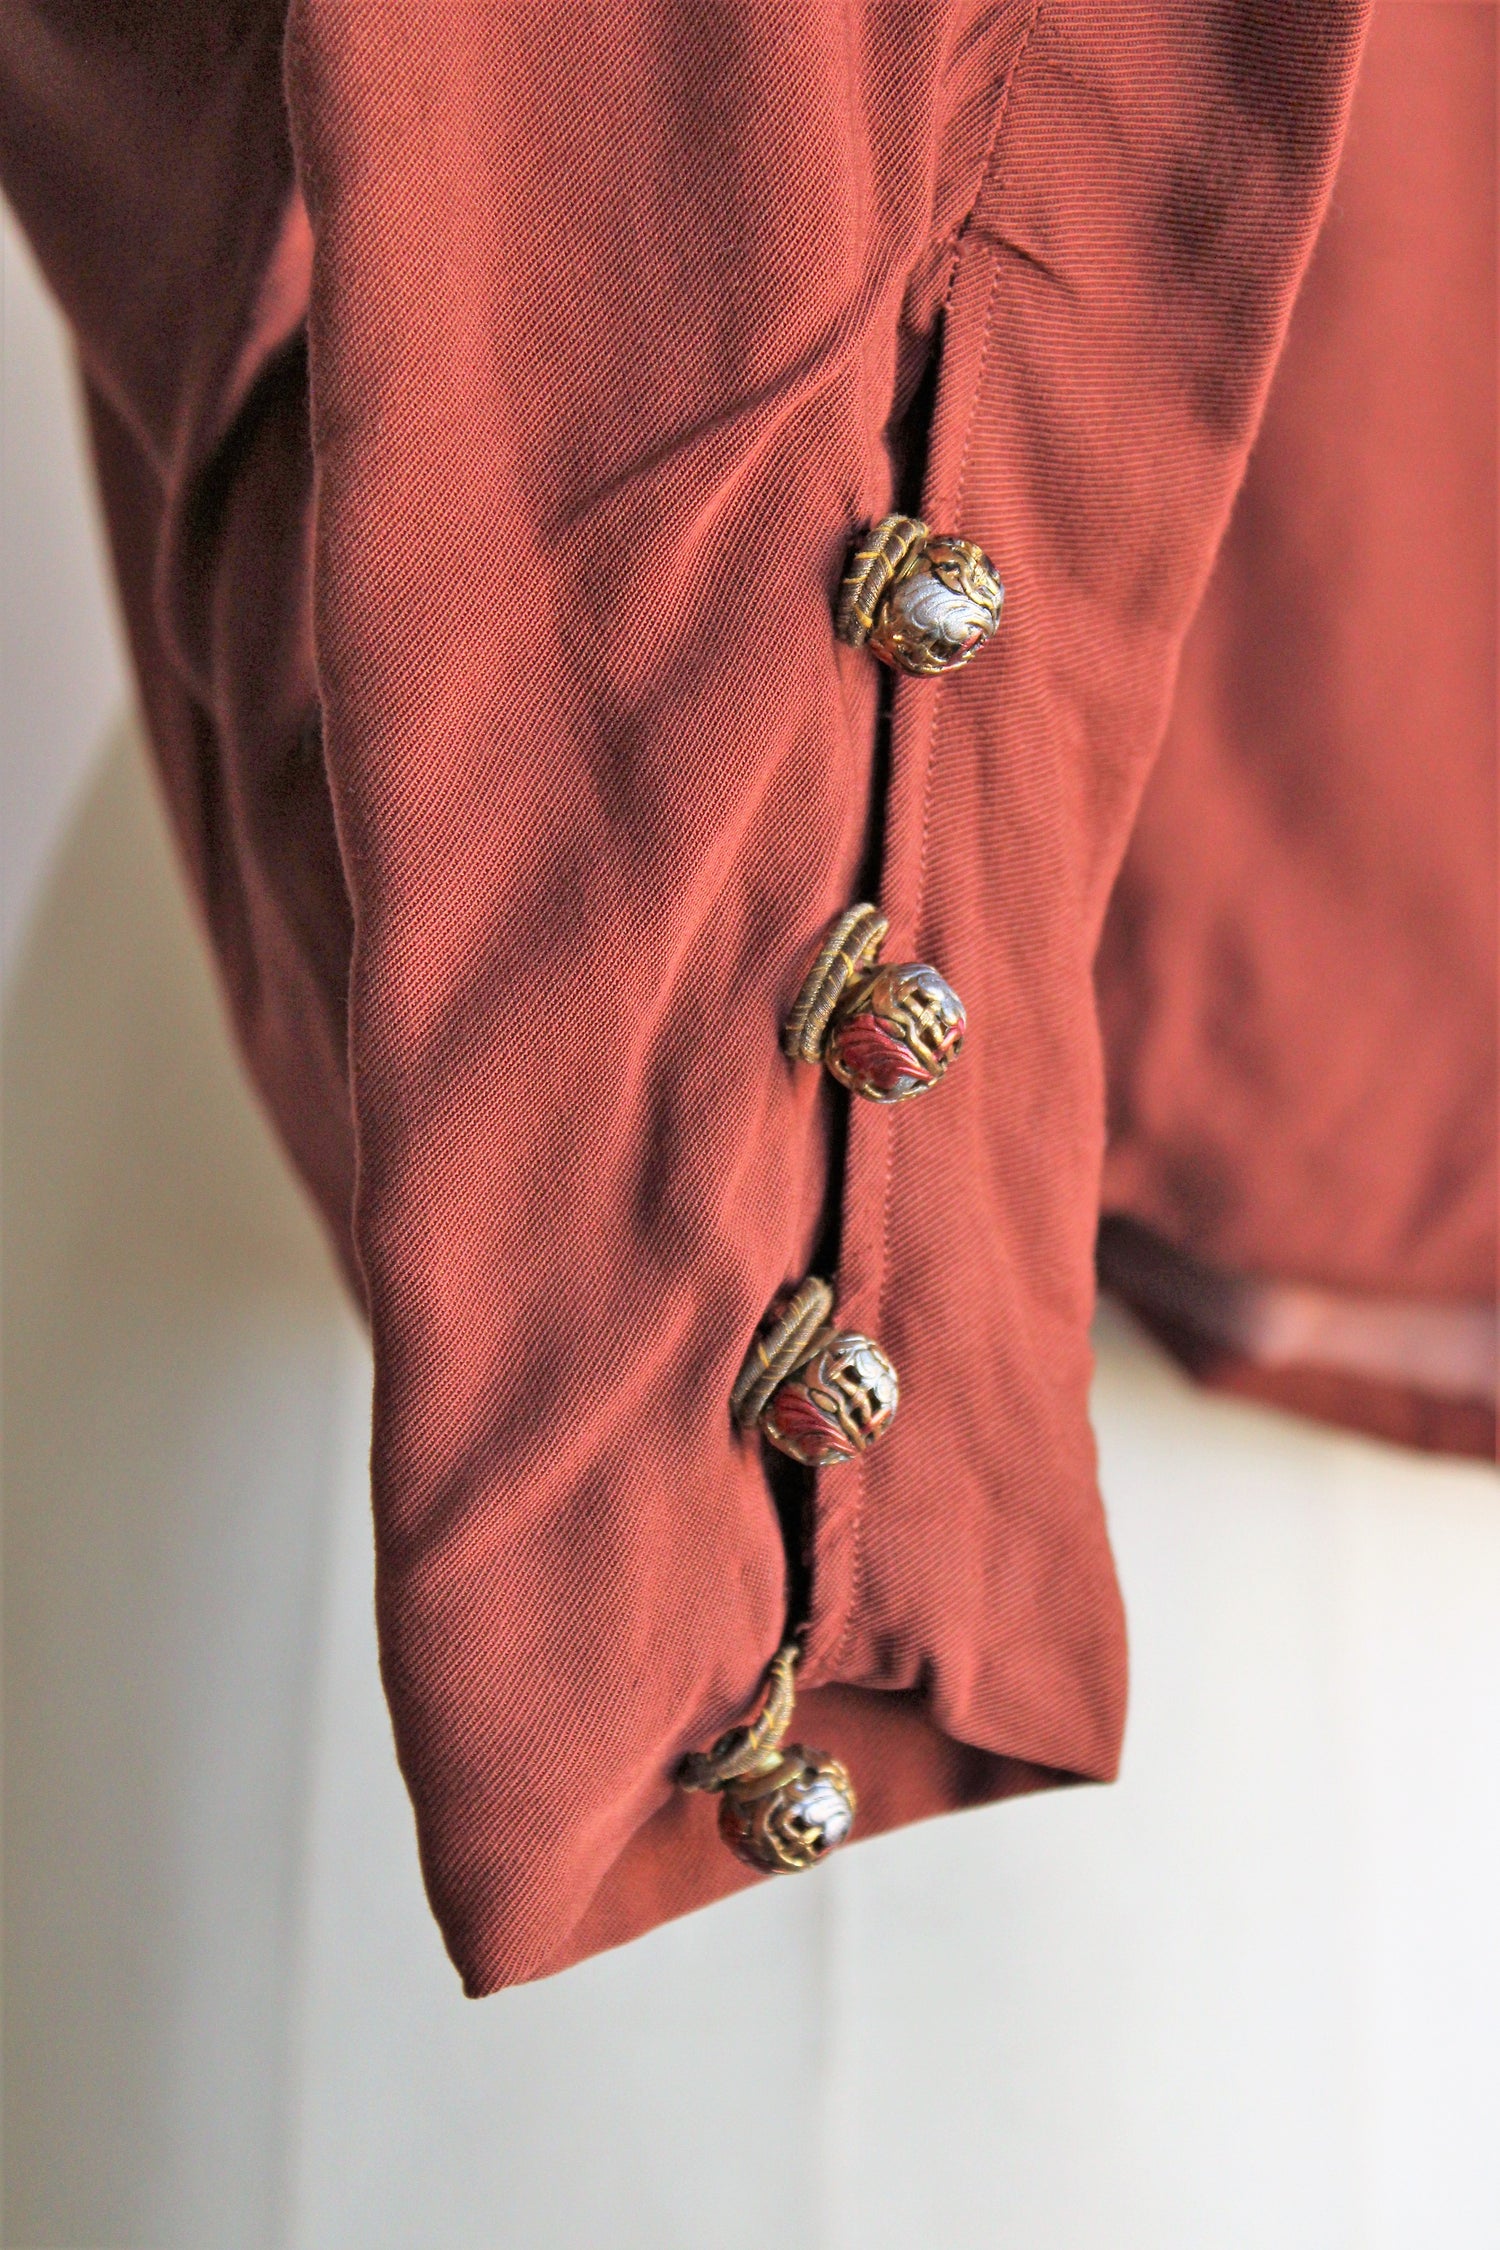 Vintage Hollywood Costume Brown Military Short Jacket With Buttons